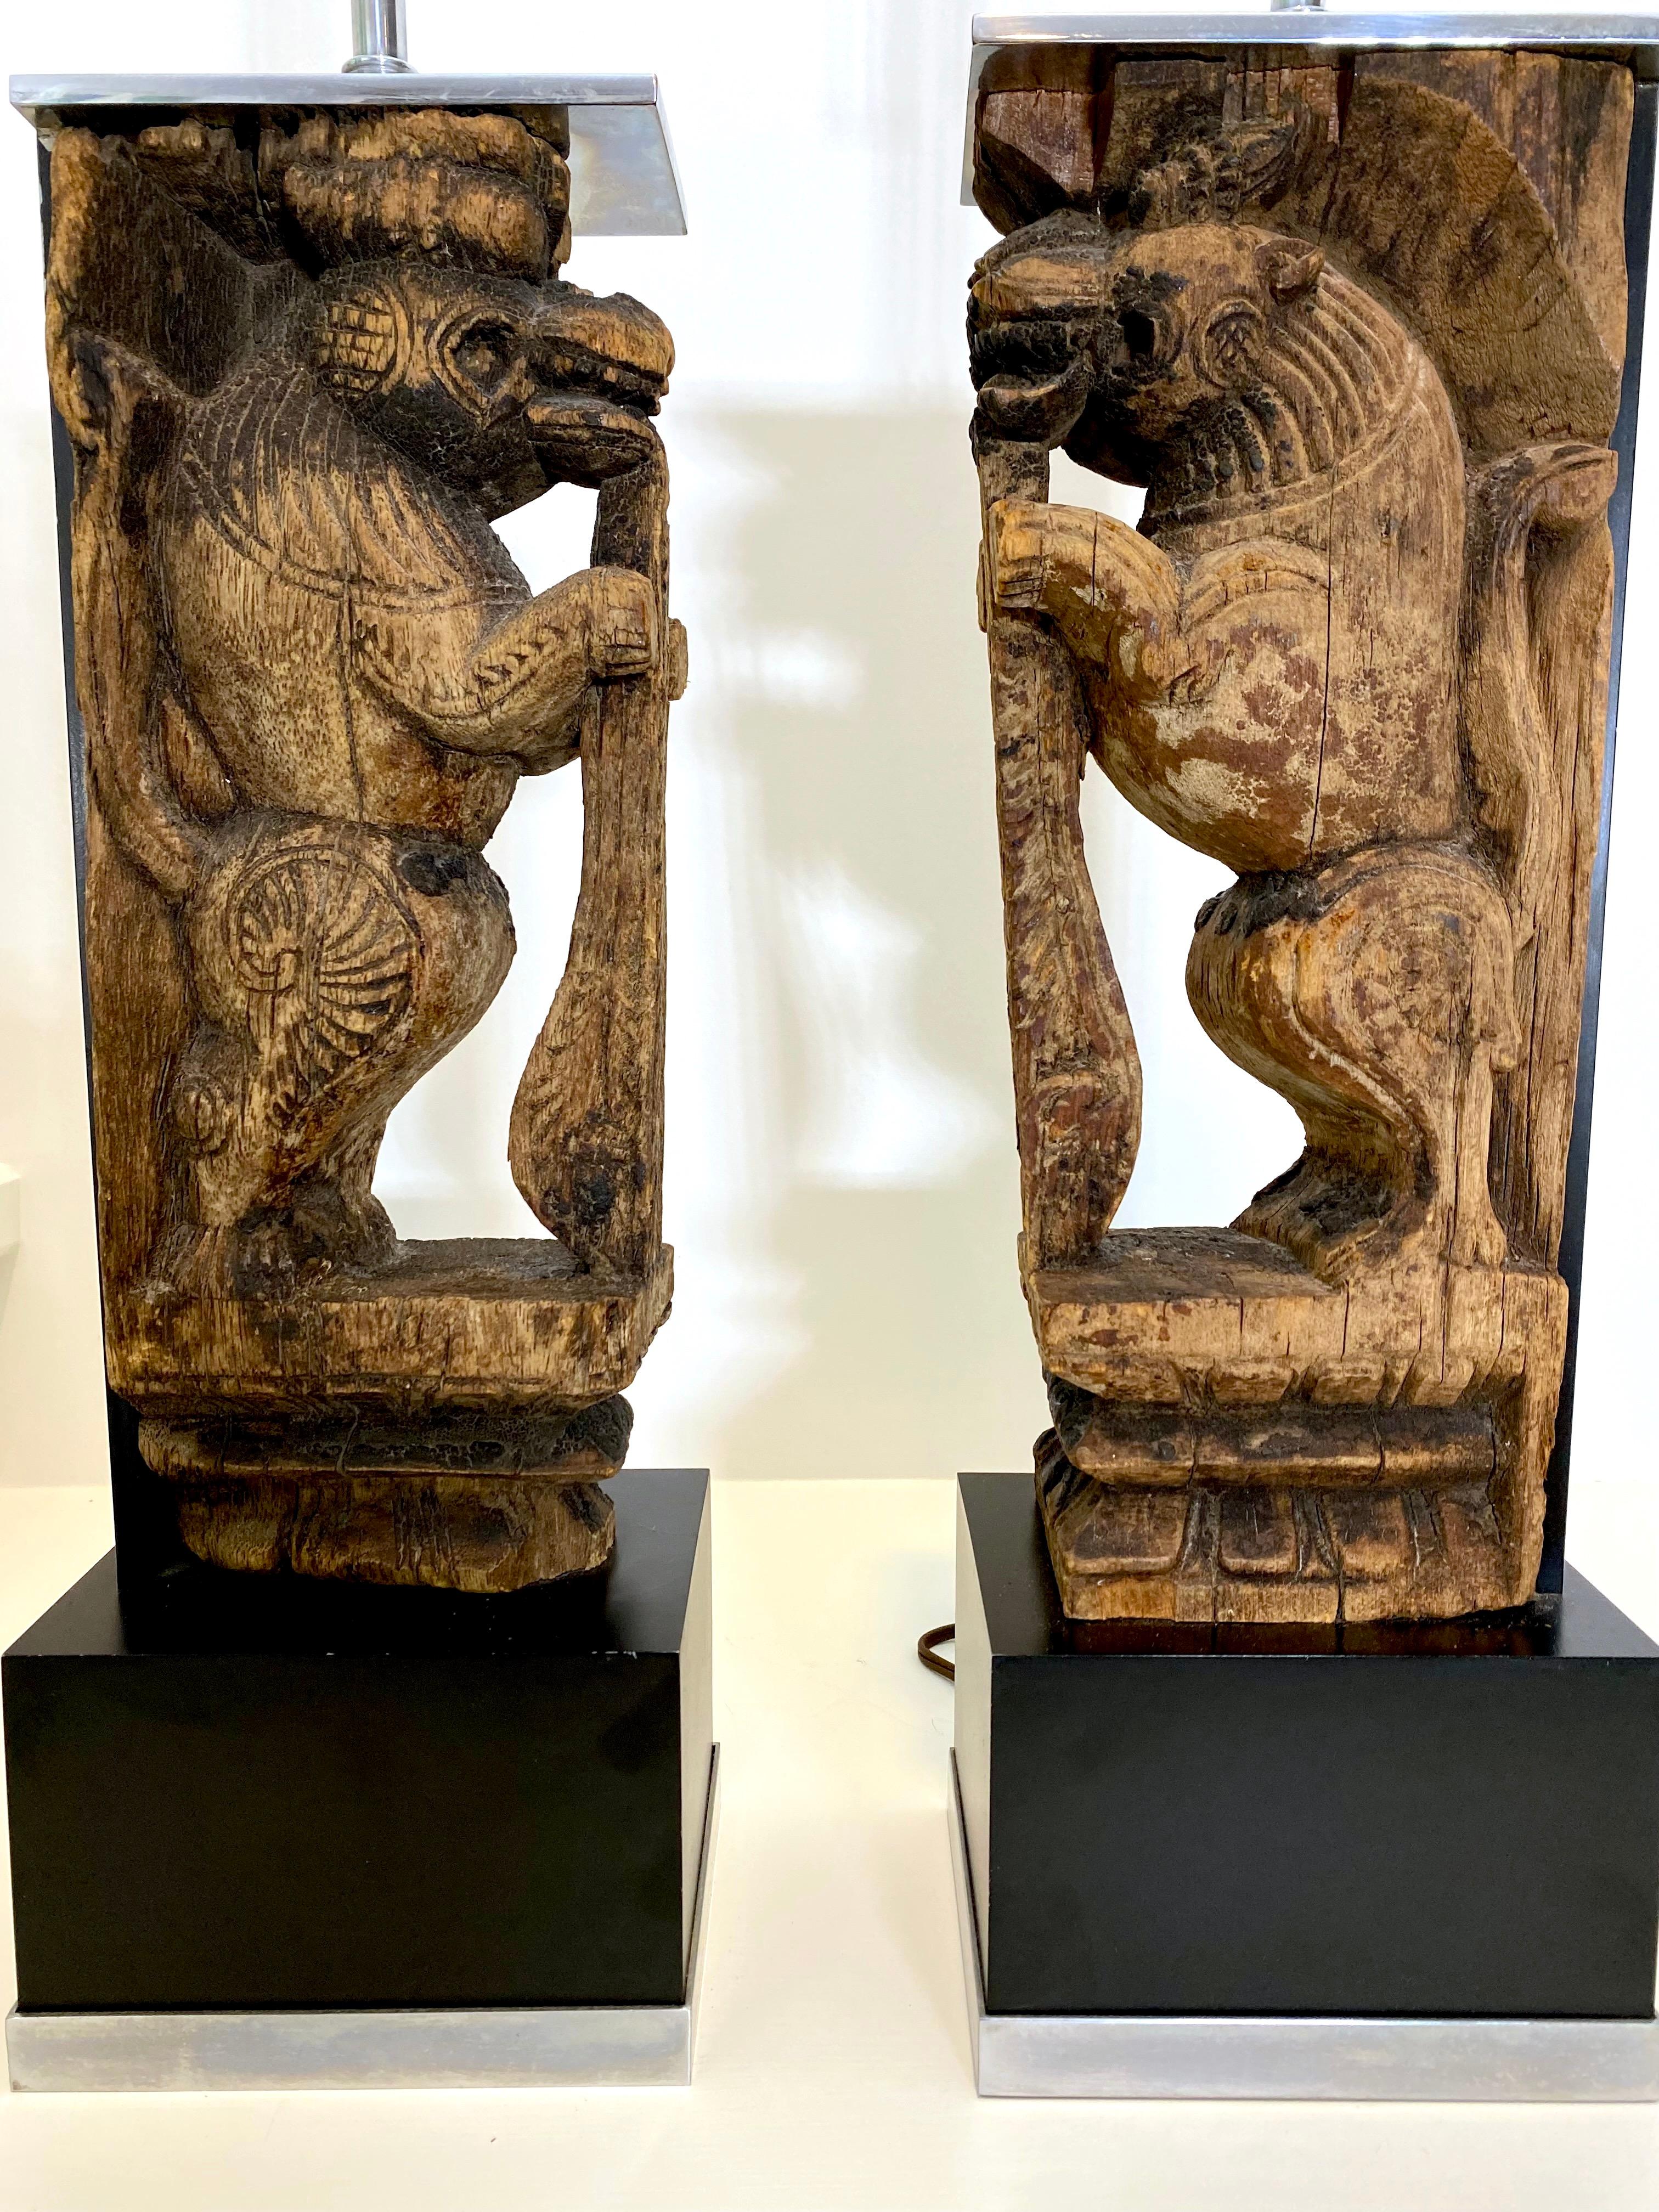 Fantastic pair of antique hand carved temple Lion sculptures that were mounted in Nickel as table lamps in the 60's giving them both a midcentury and antique feel. From a unique home in Cambridge, Massachusetts with an art collection ranging from